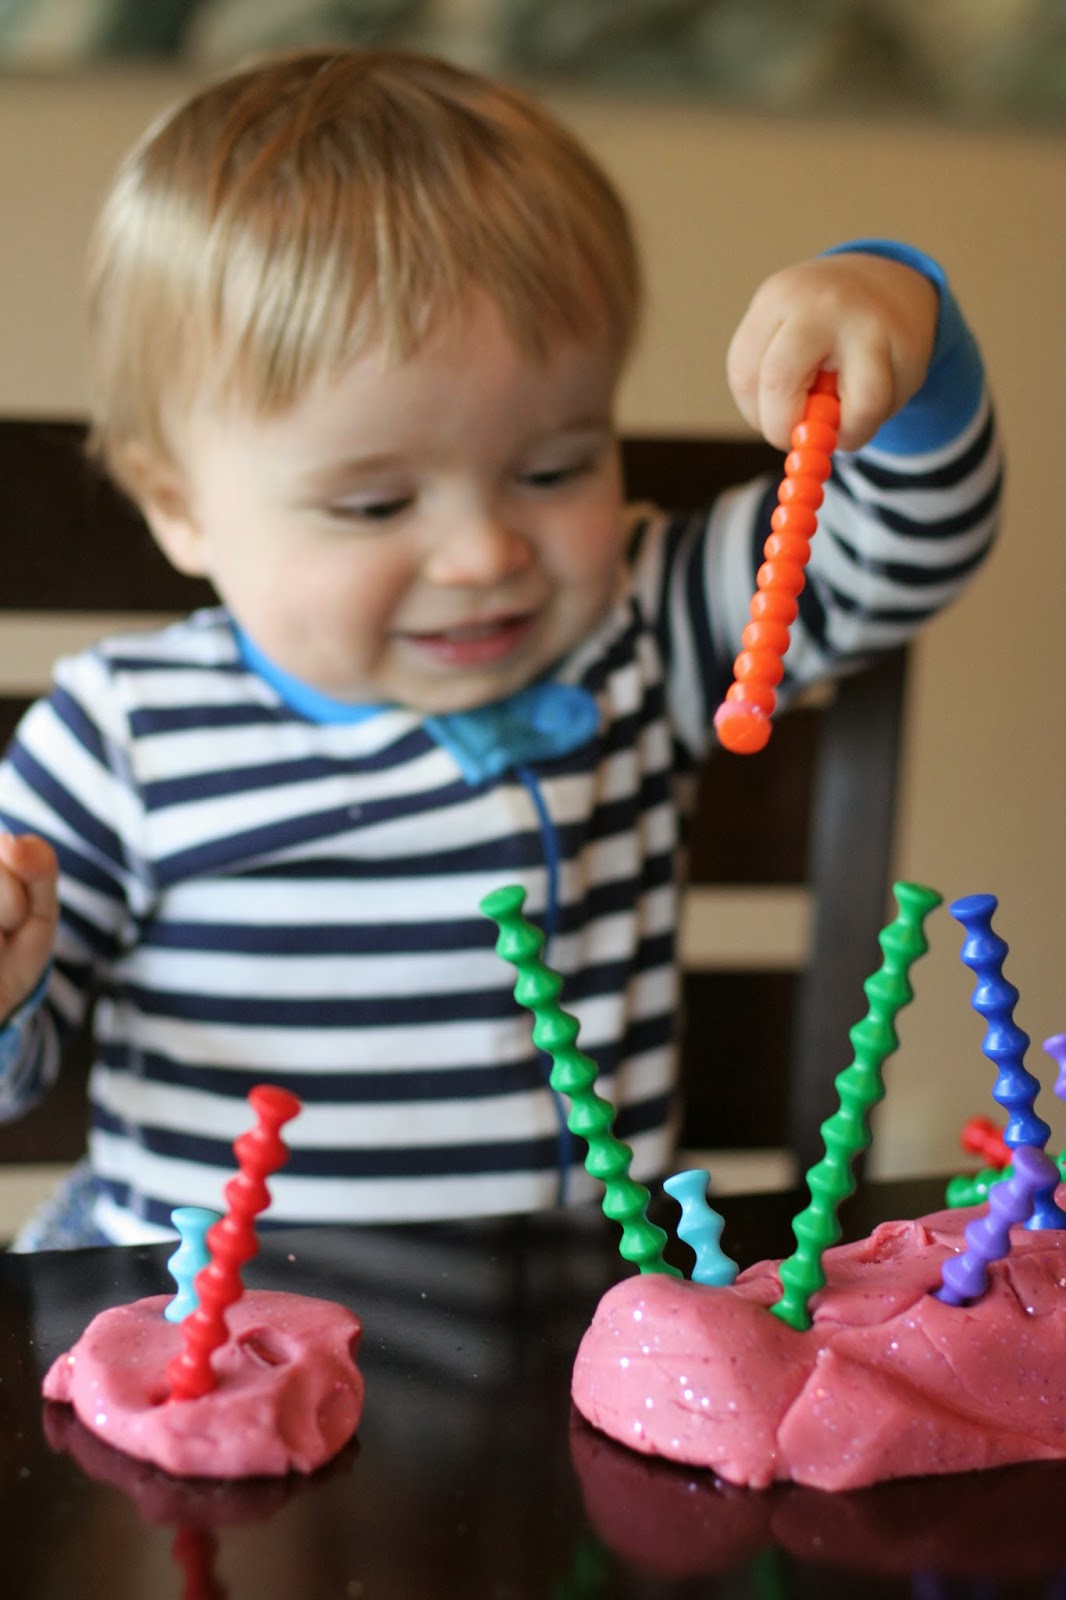 When Is Your Child Old Enough to Play With Play Dough?